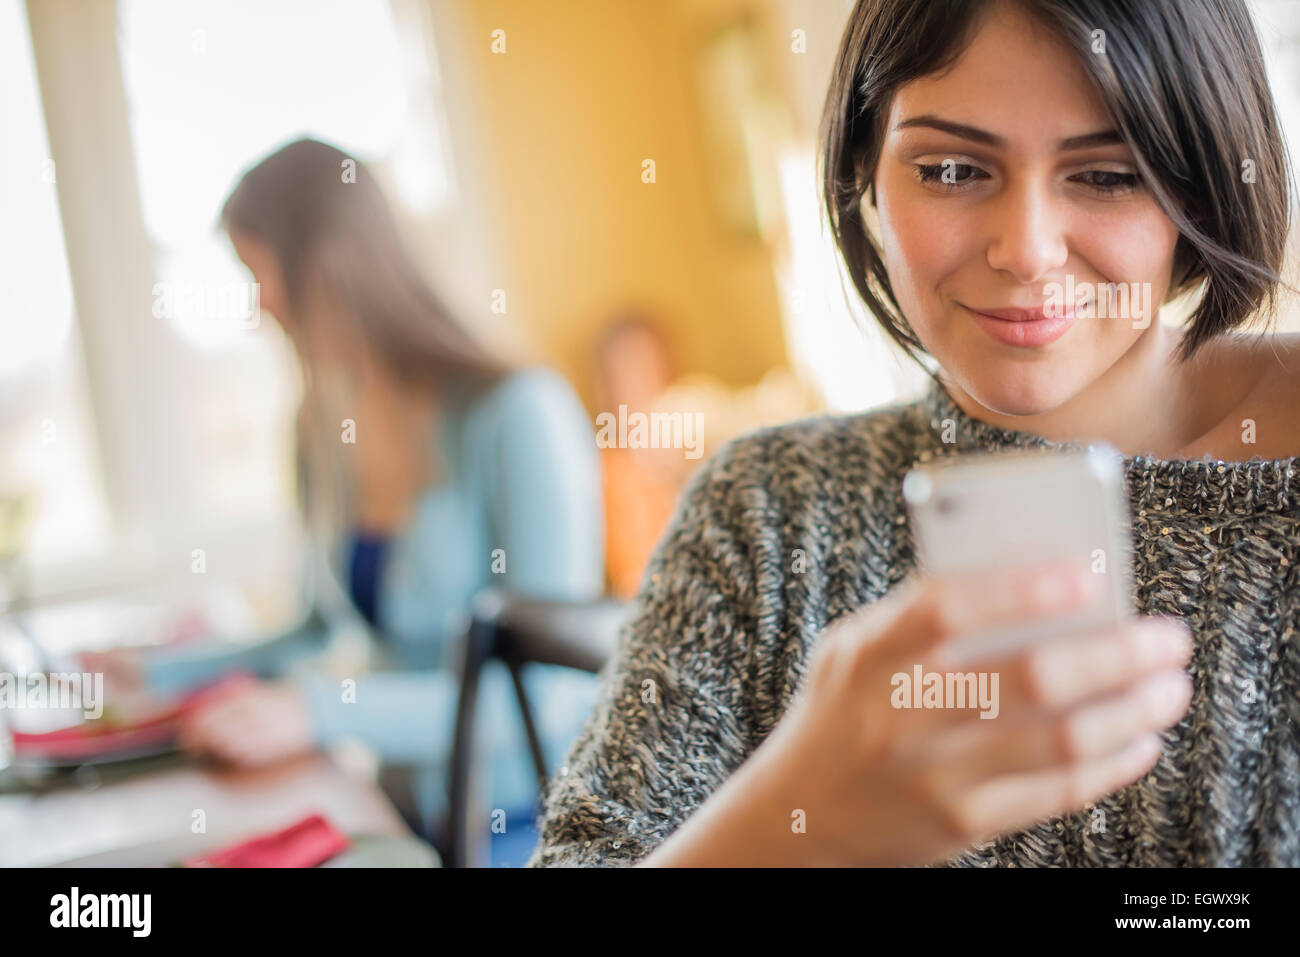 A woman checking her smart phone. Stock Photo